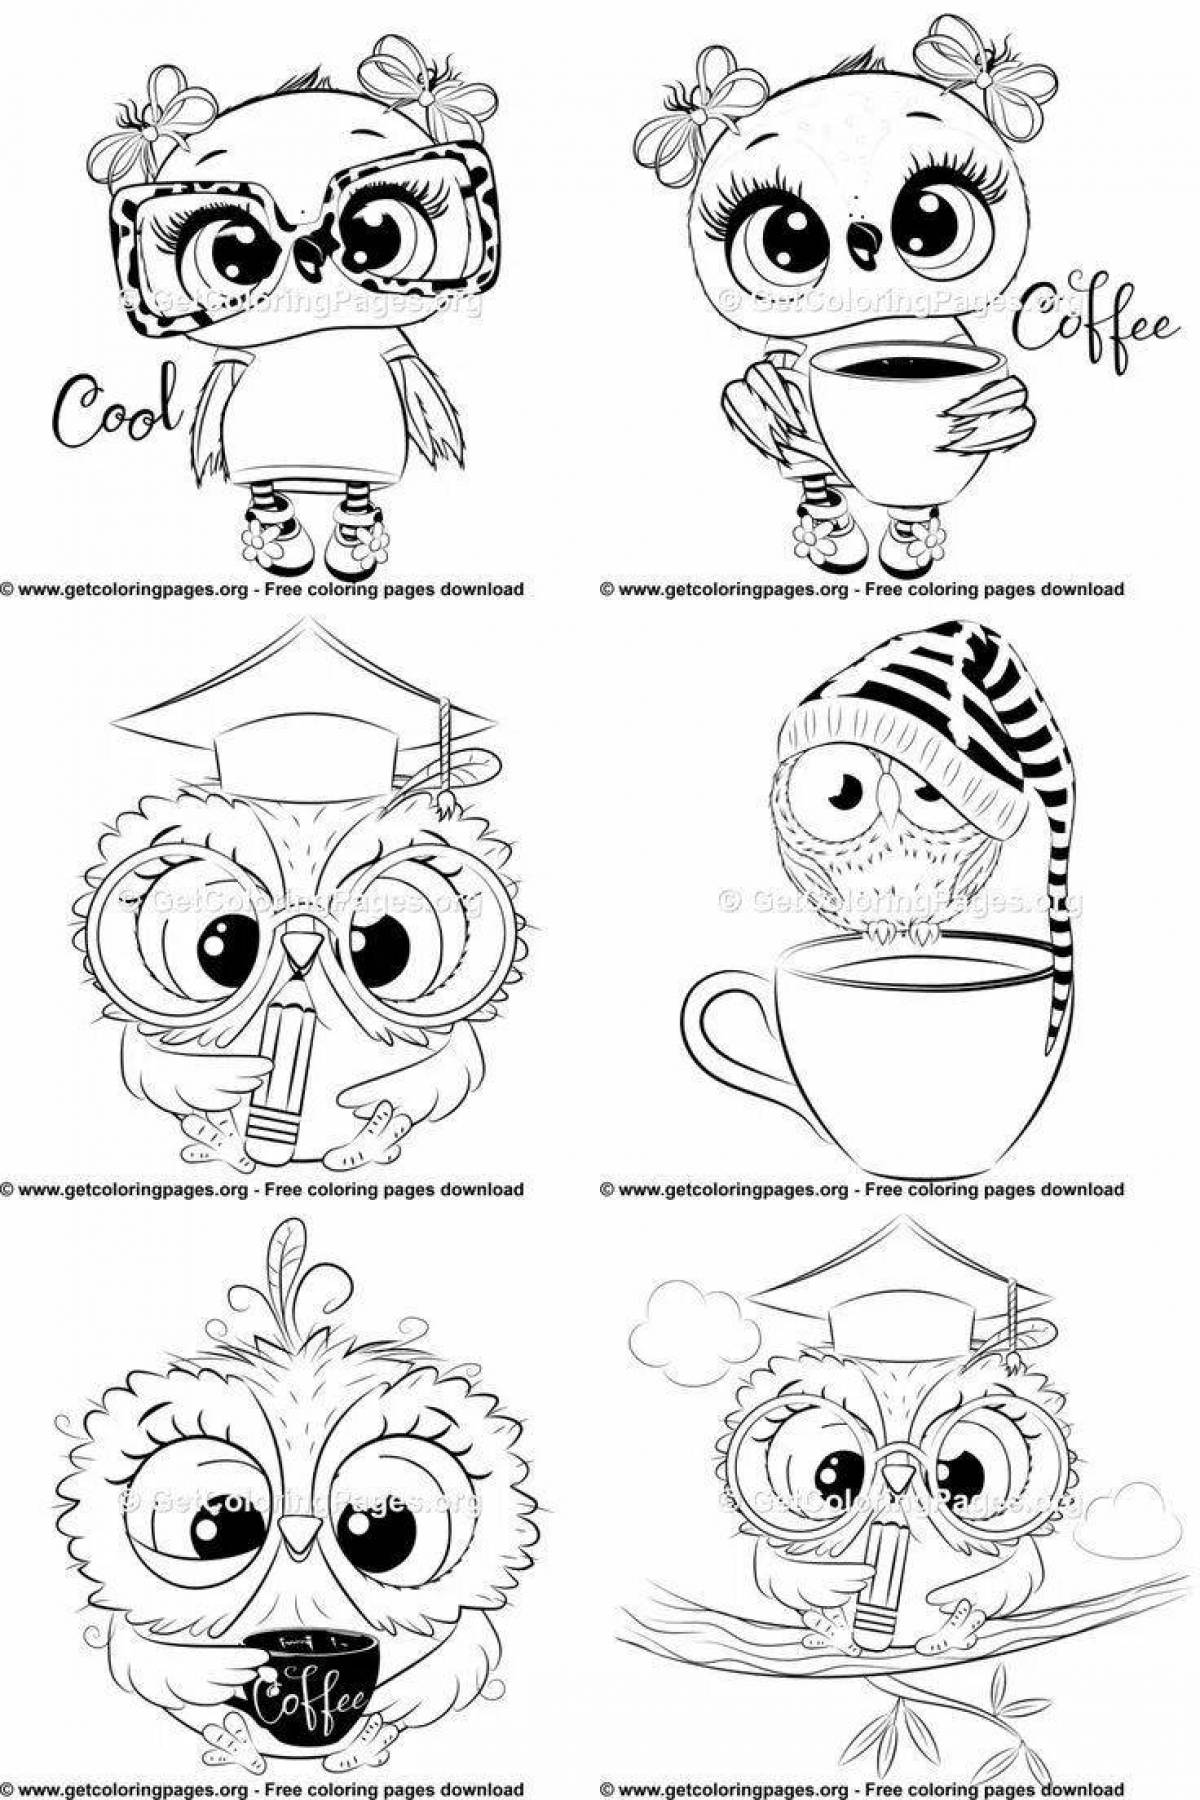 Silly cute owl coloring book